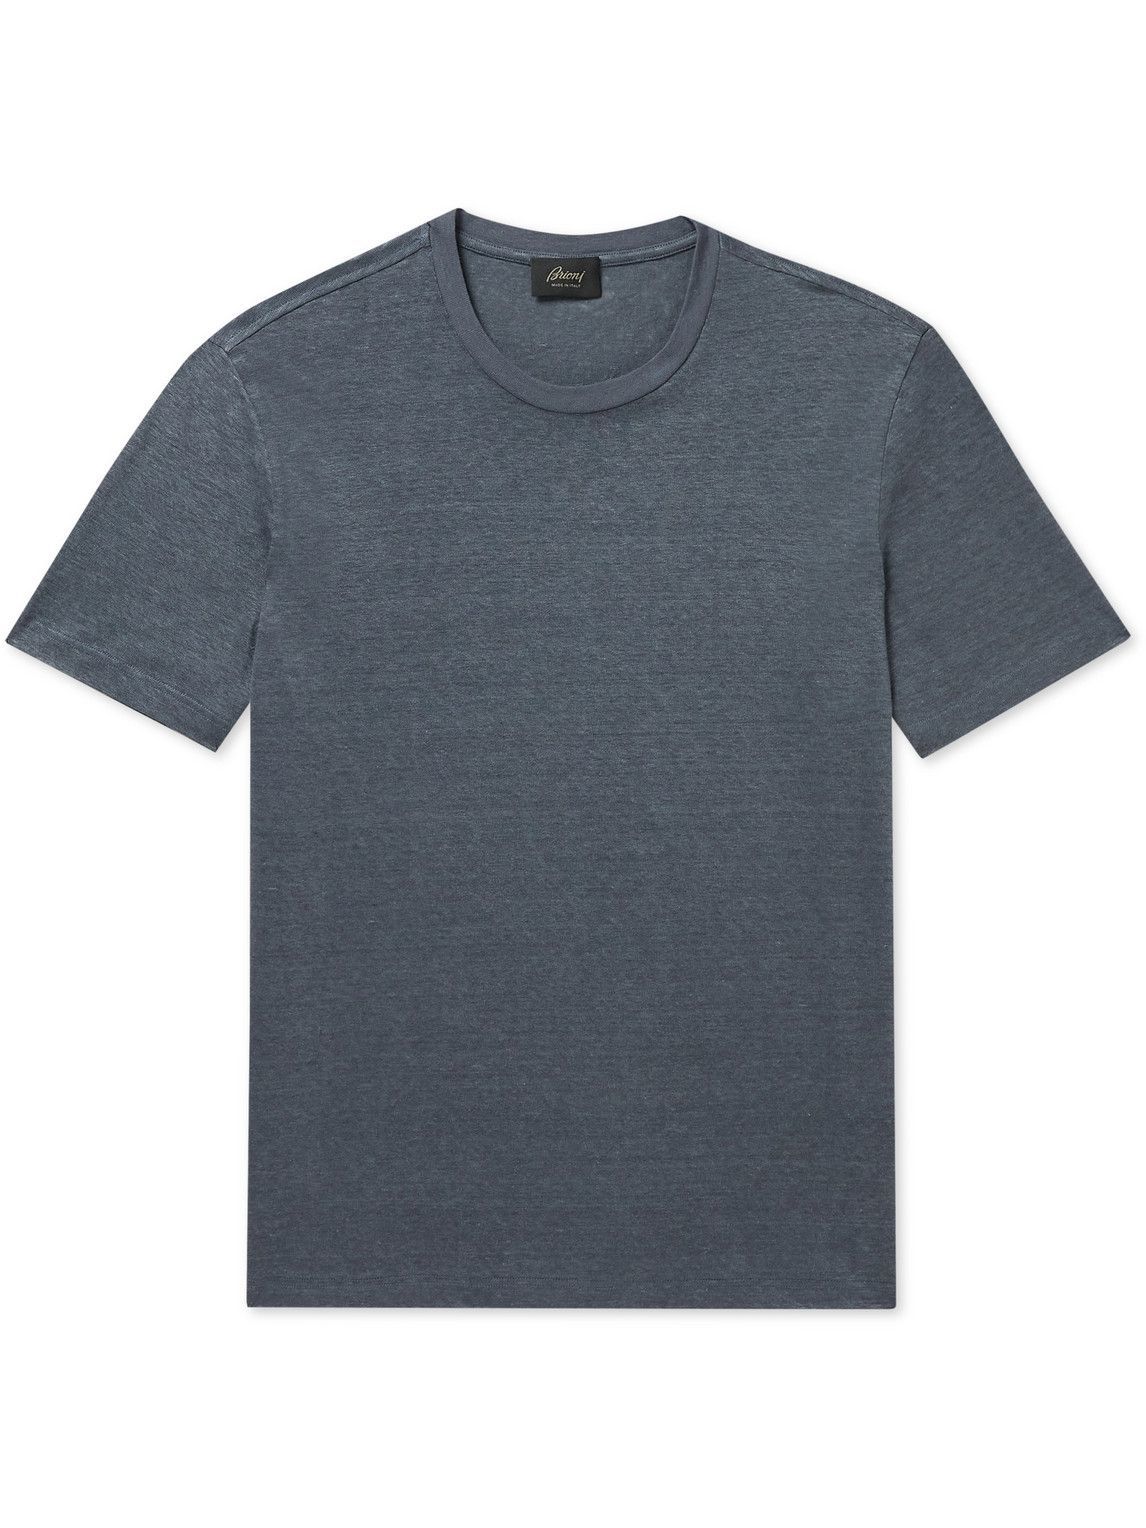 Brioni - Slim-Fit Logo-Embroidered Knitted Cotton T-Shirt - Men 